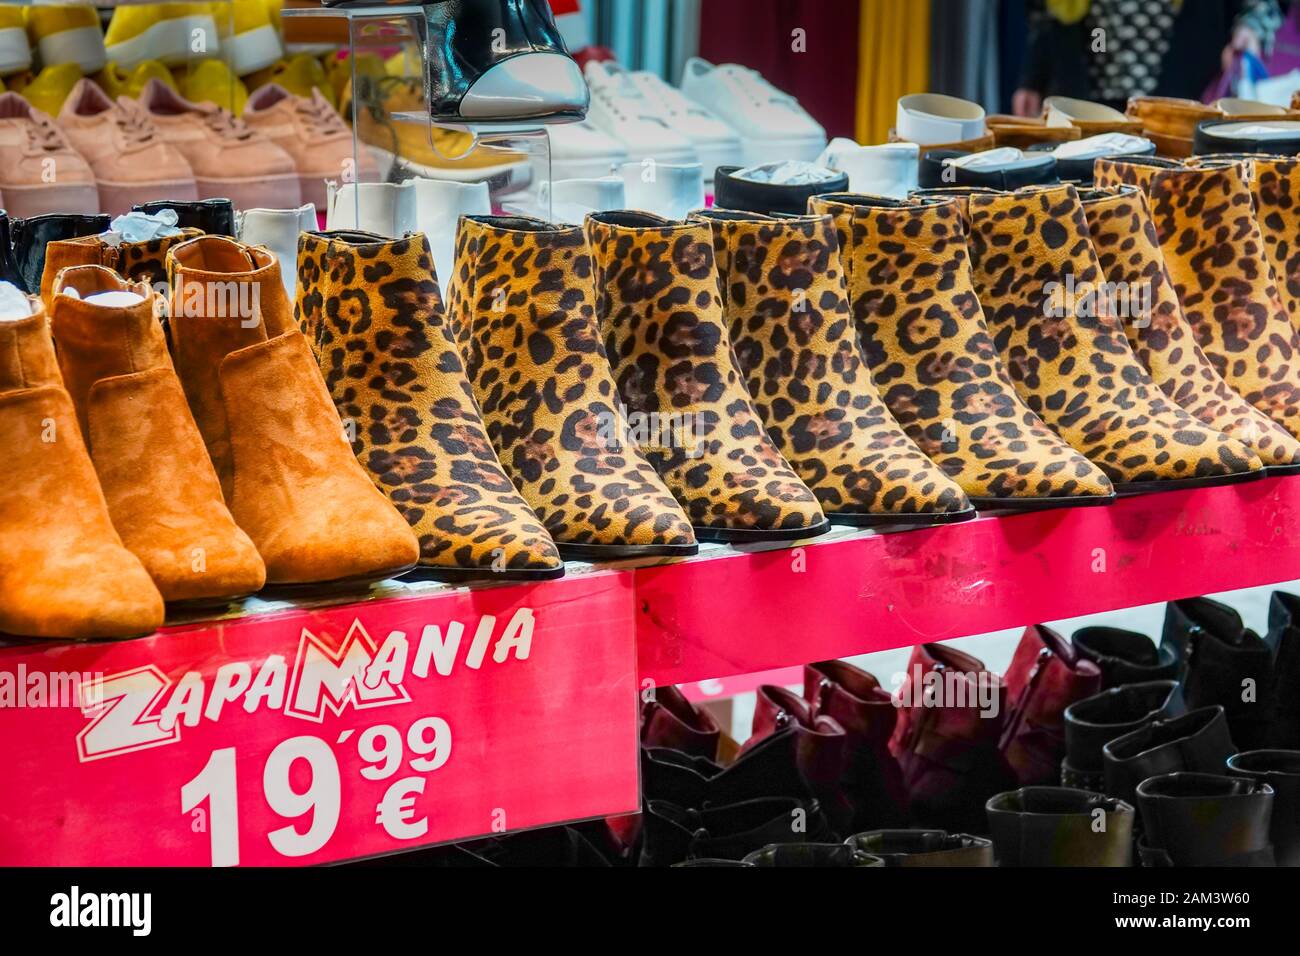 Benidorm old town, Alicante Province, Spain. Zapamania, row of ladies boots including leopard skin printed ones. Stock Photo